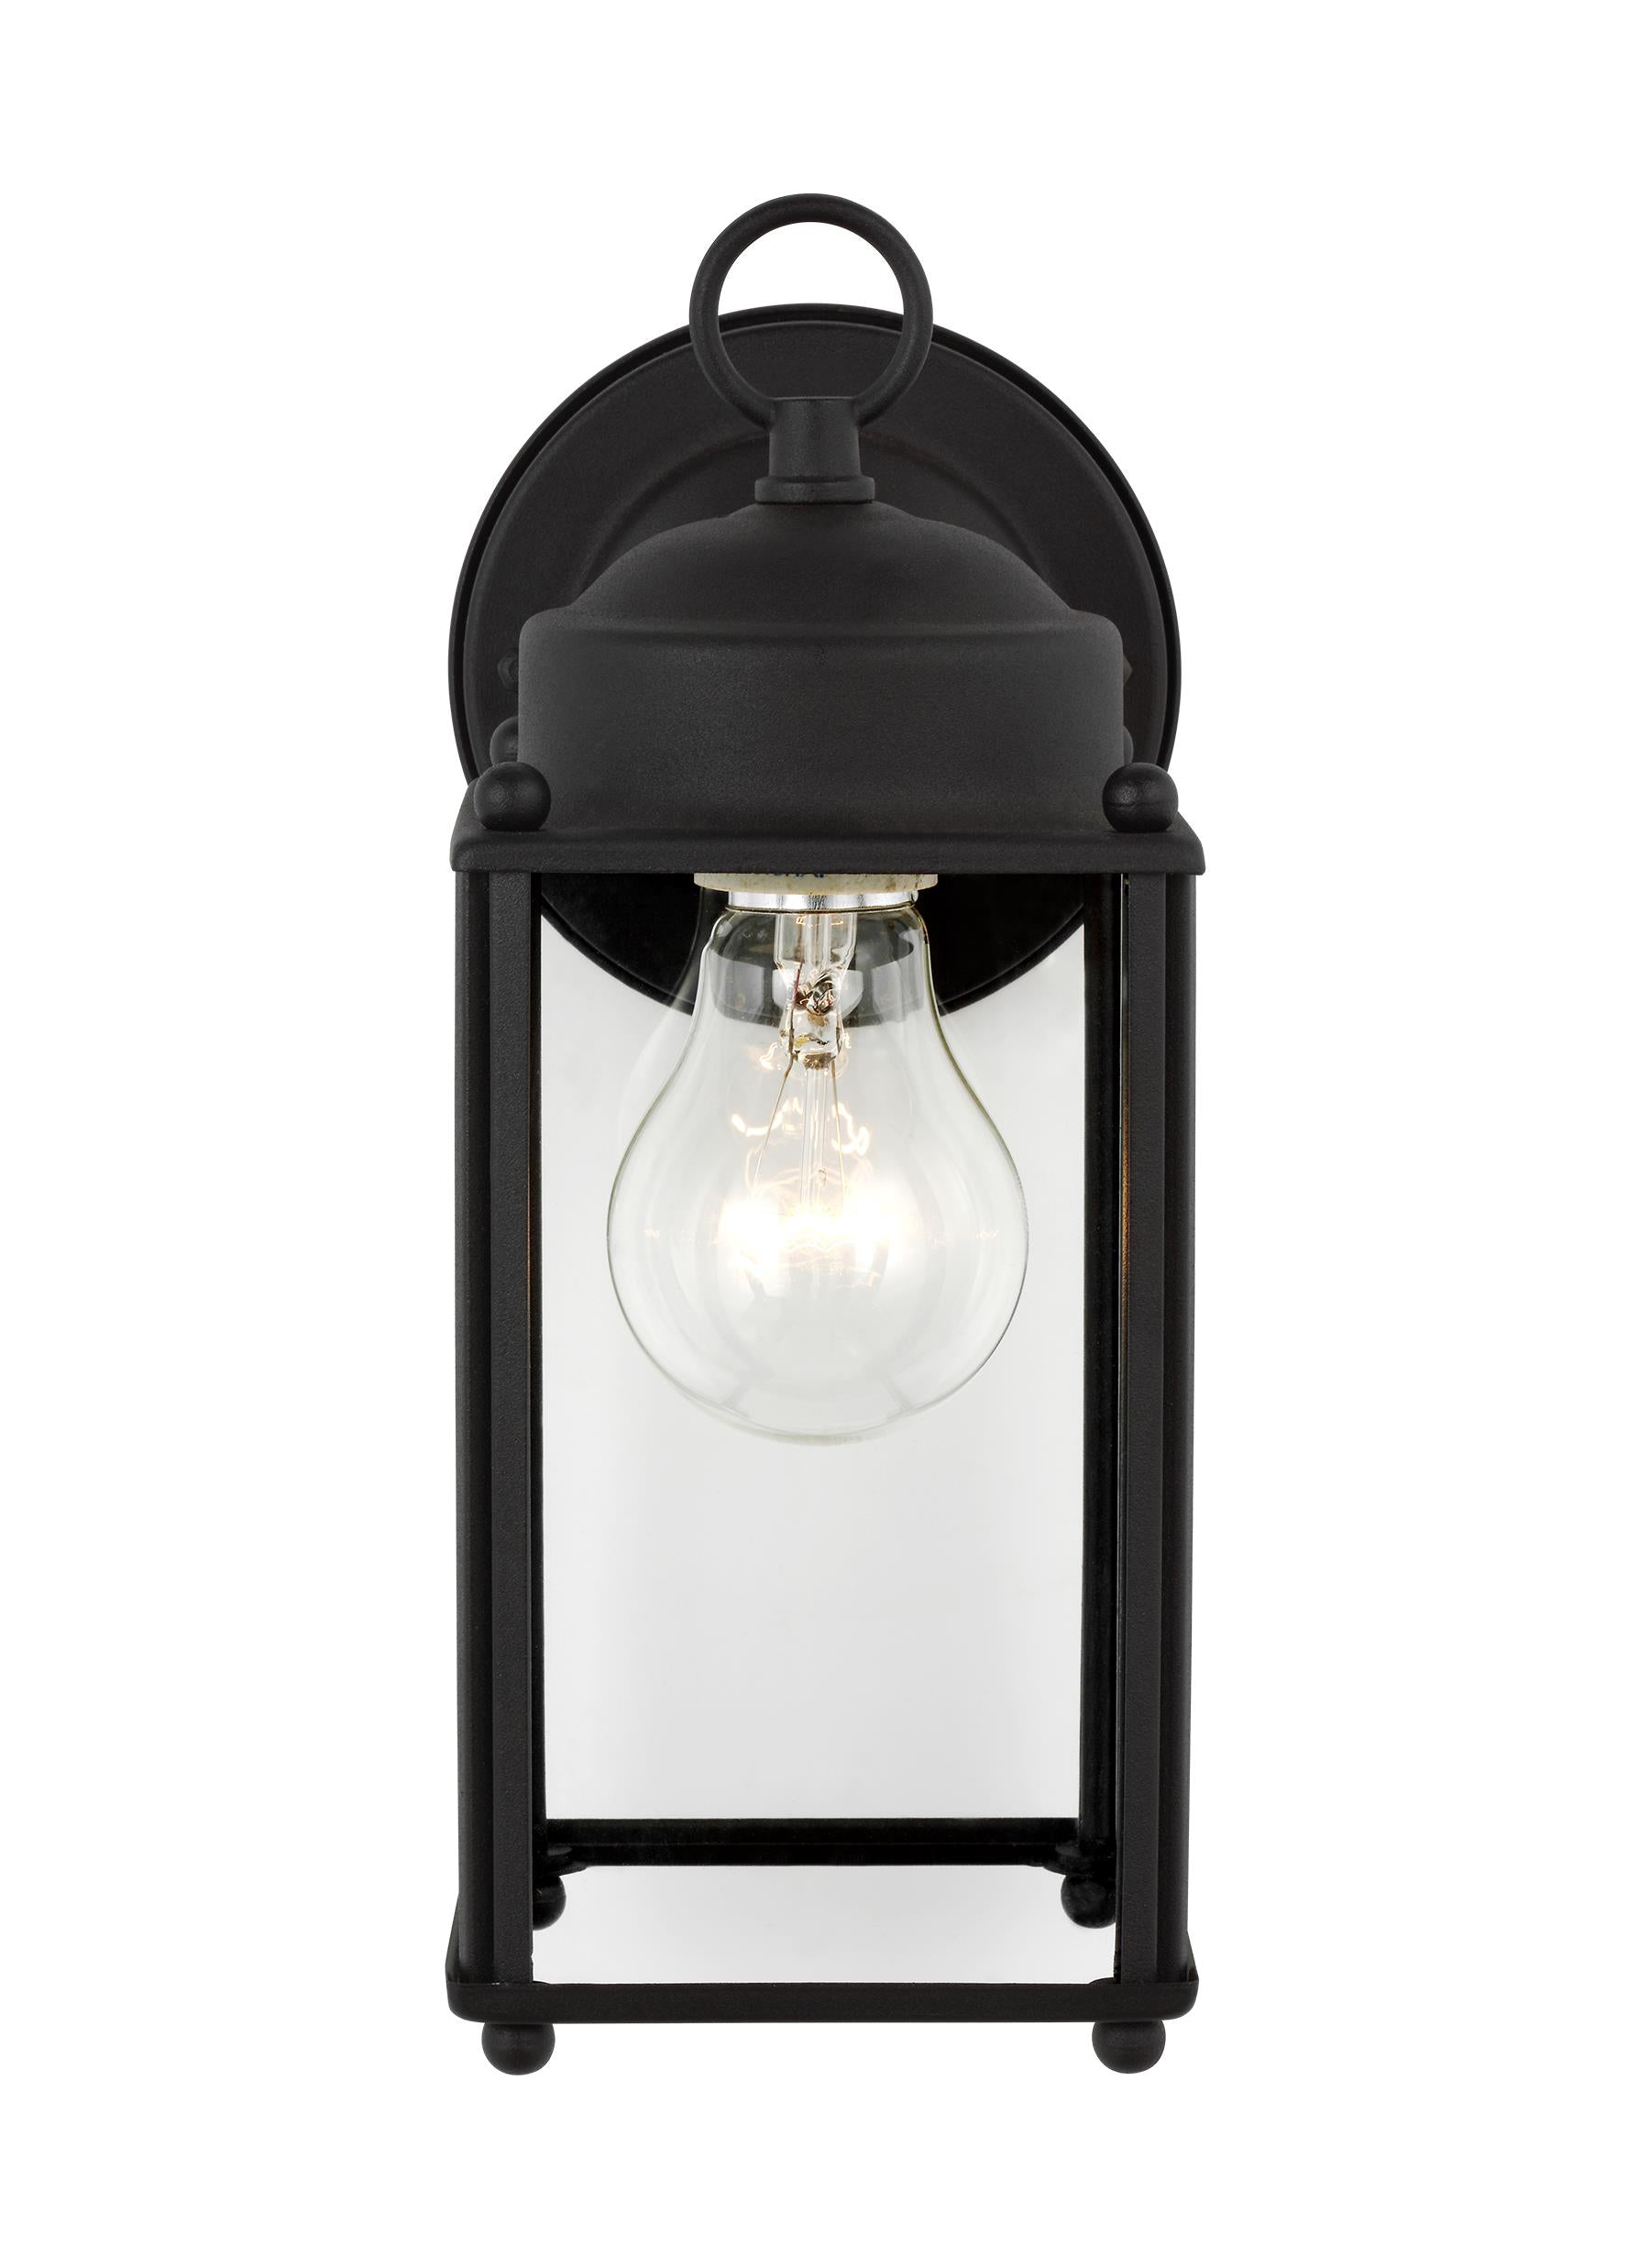 New Castle traditional 1-light outdoor exterior large wall lantern sconce in black finish with clear glass panels